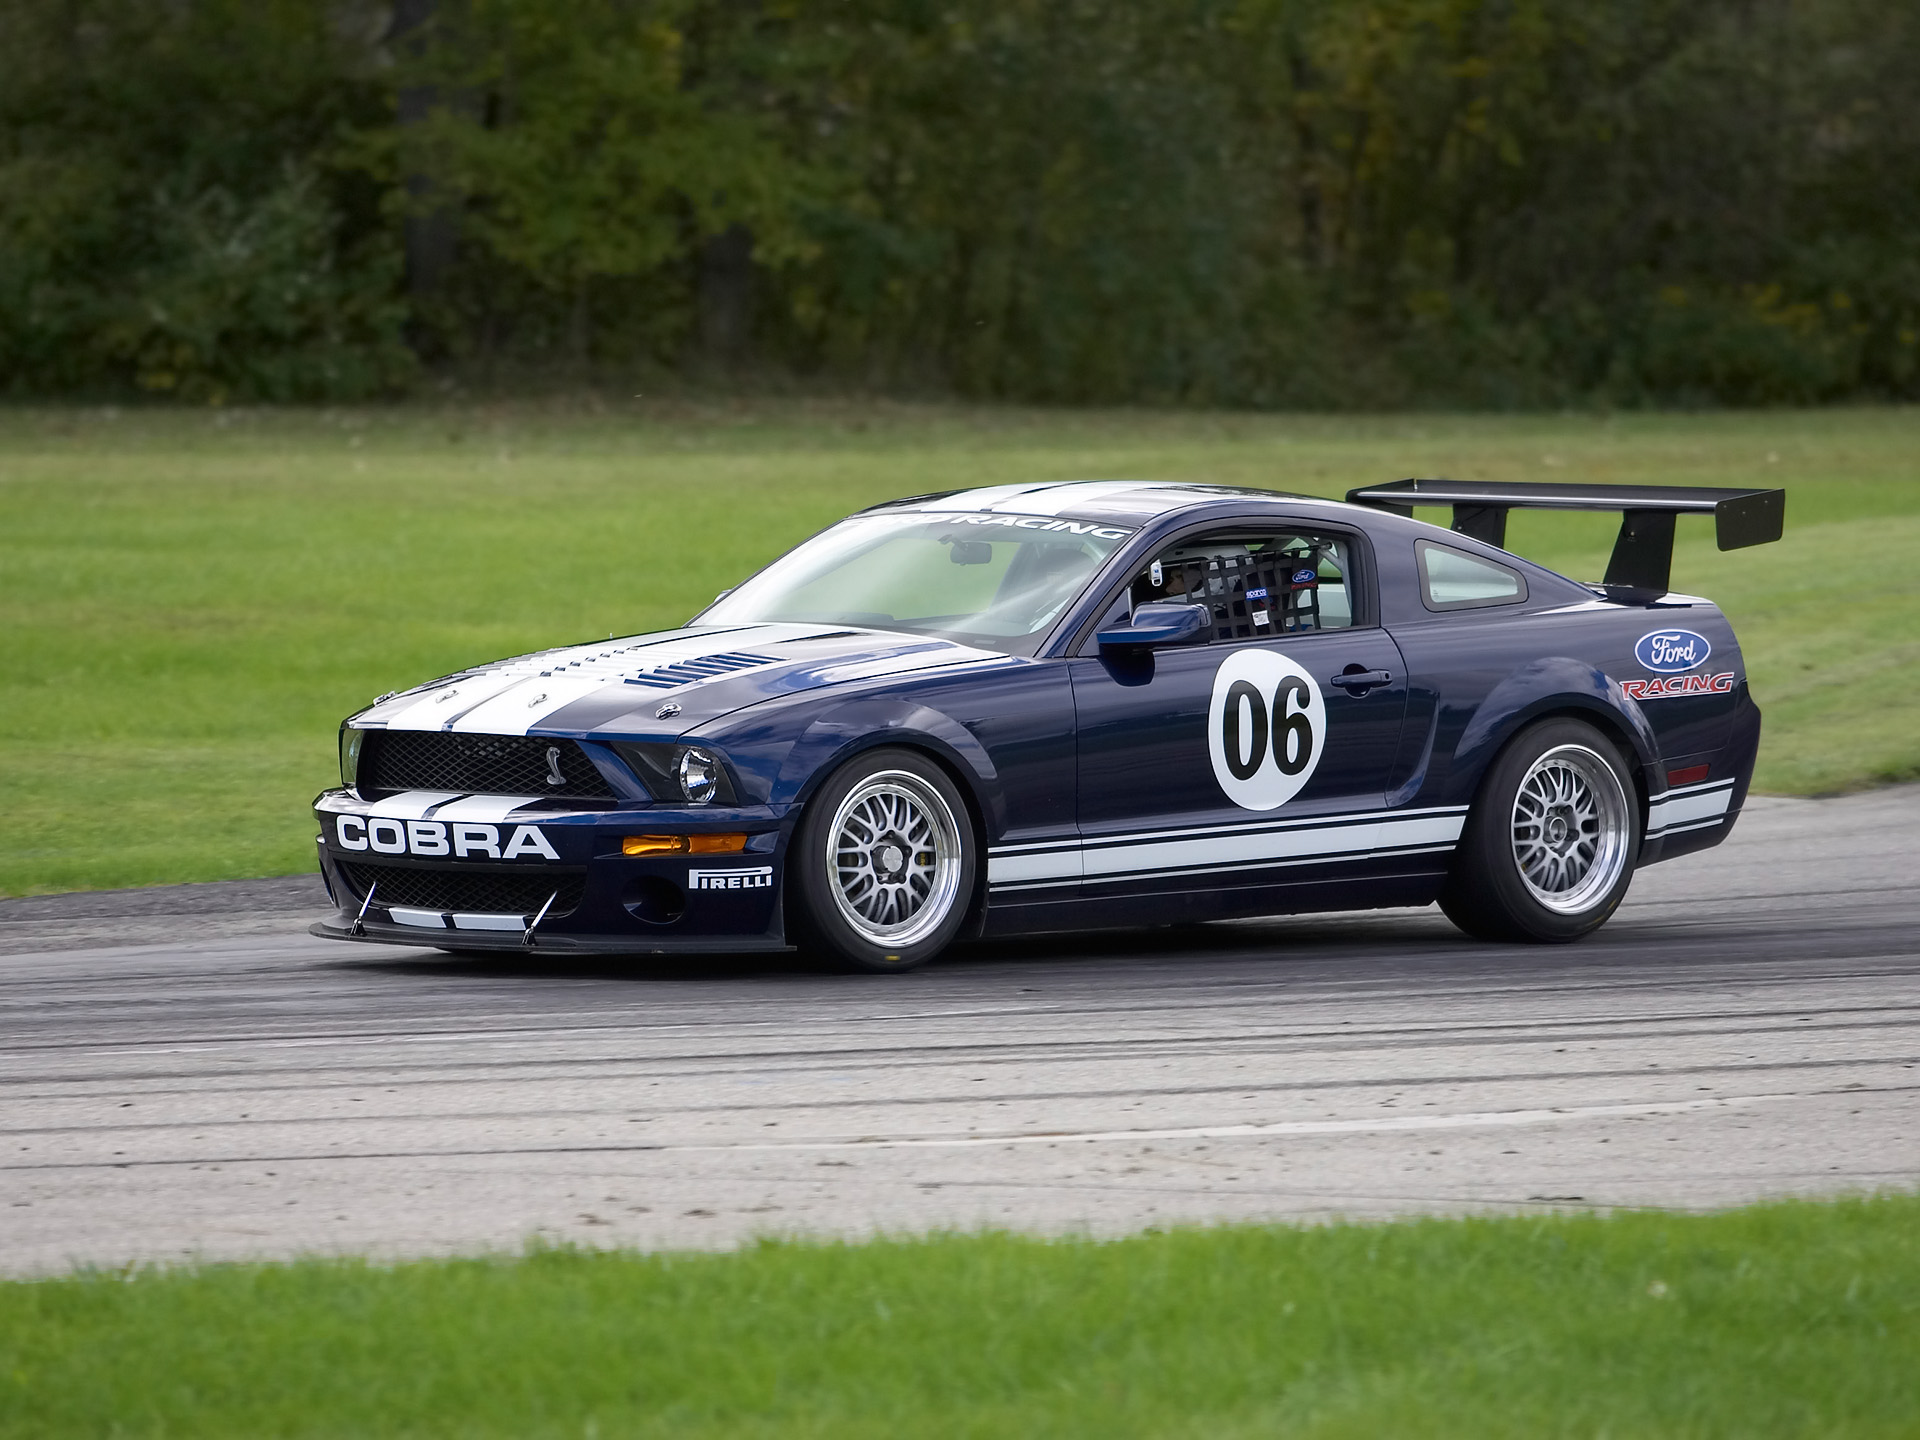 Mustang Of The Day: 2007 Ford Mustang FR500 GT